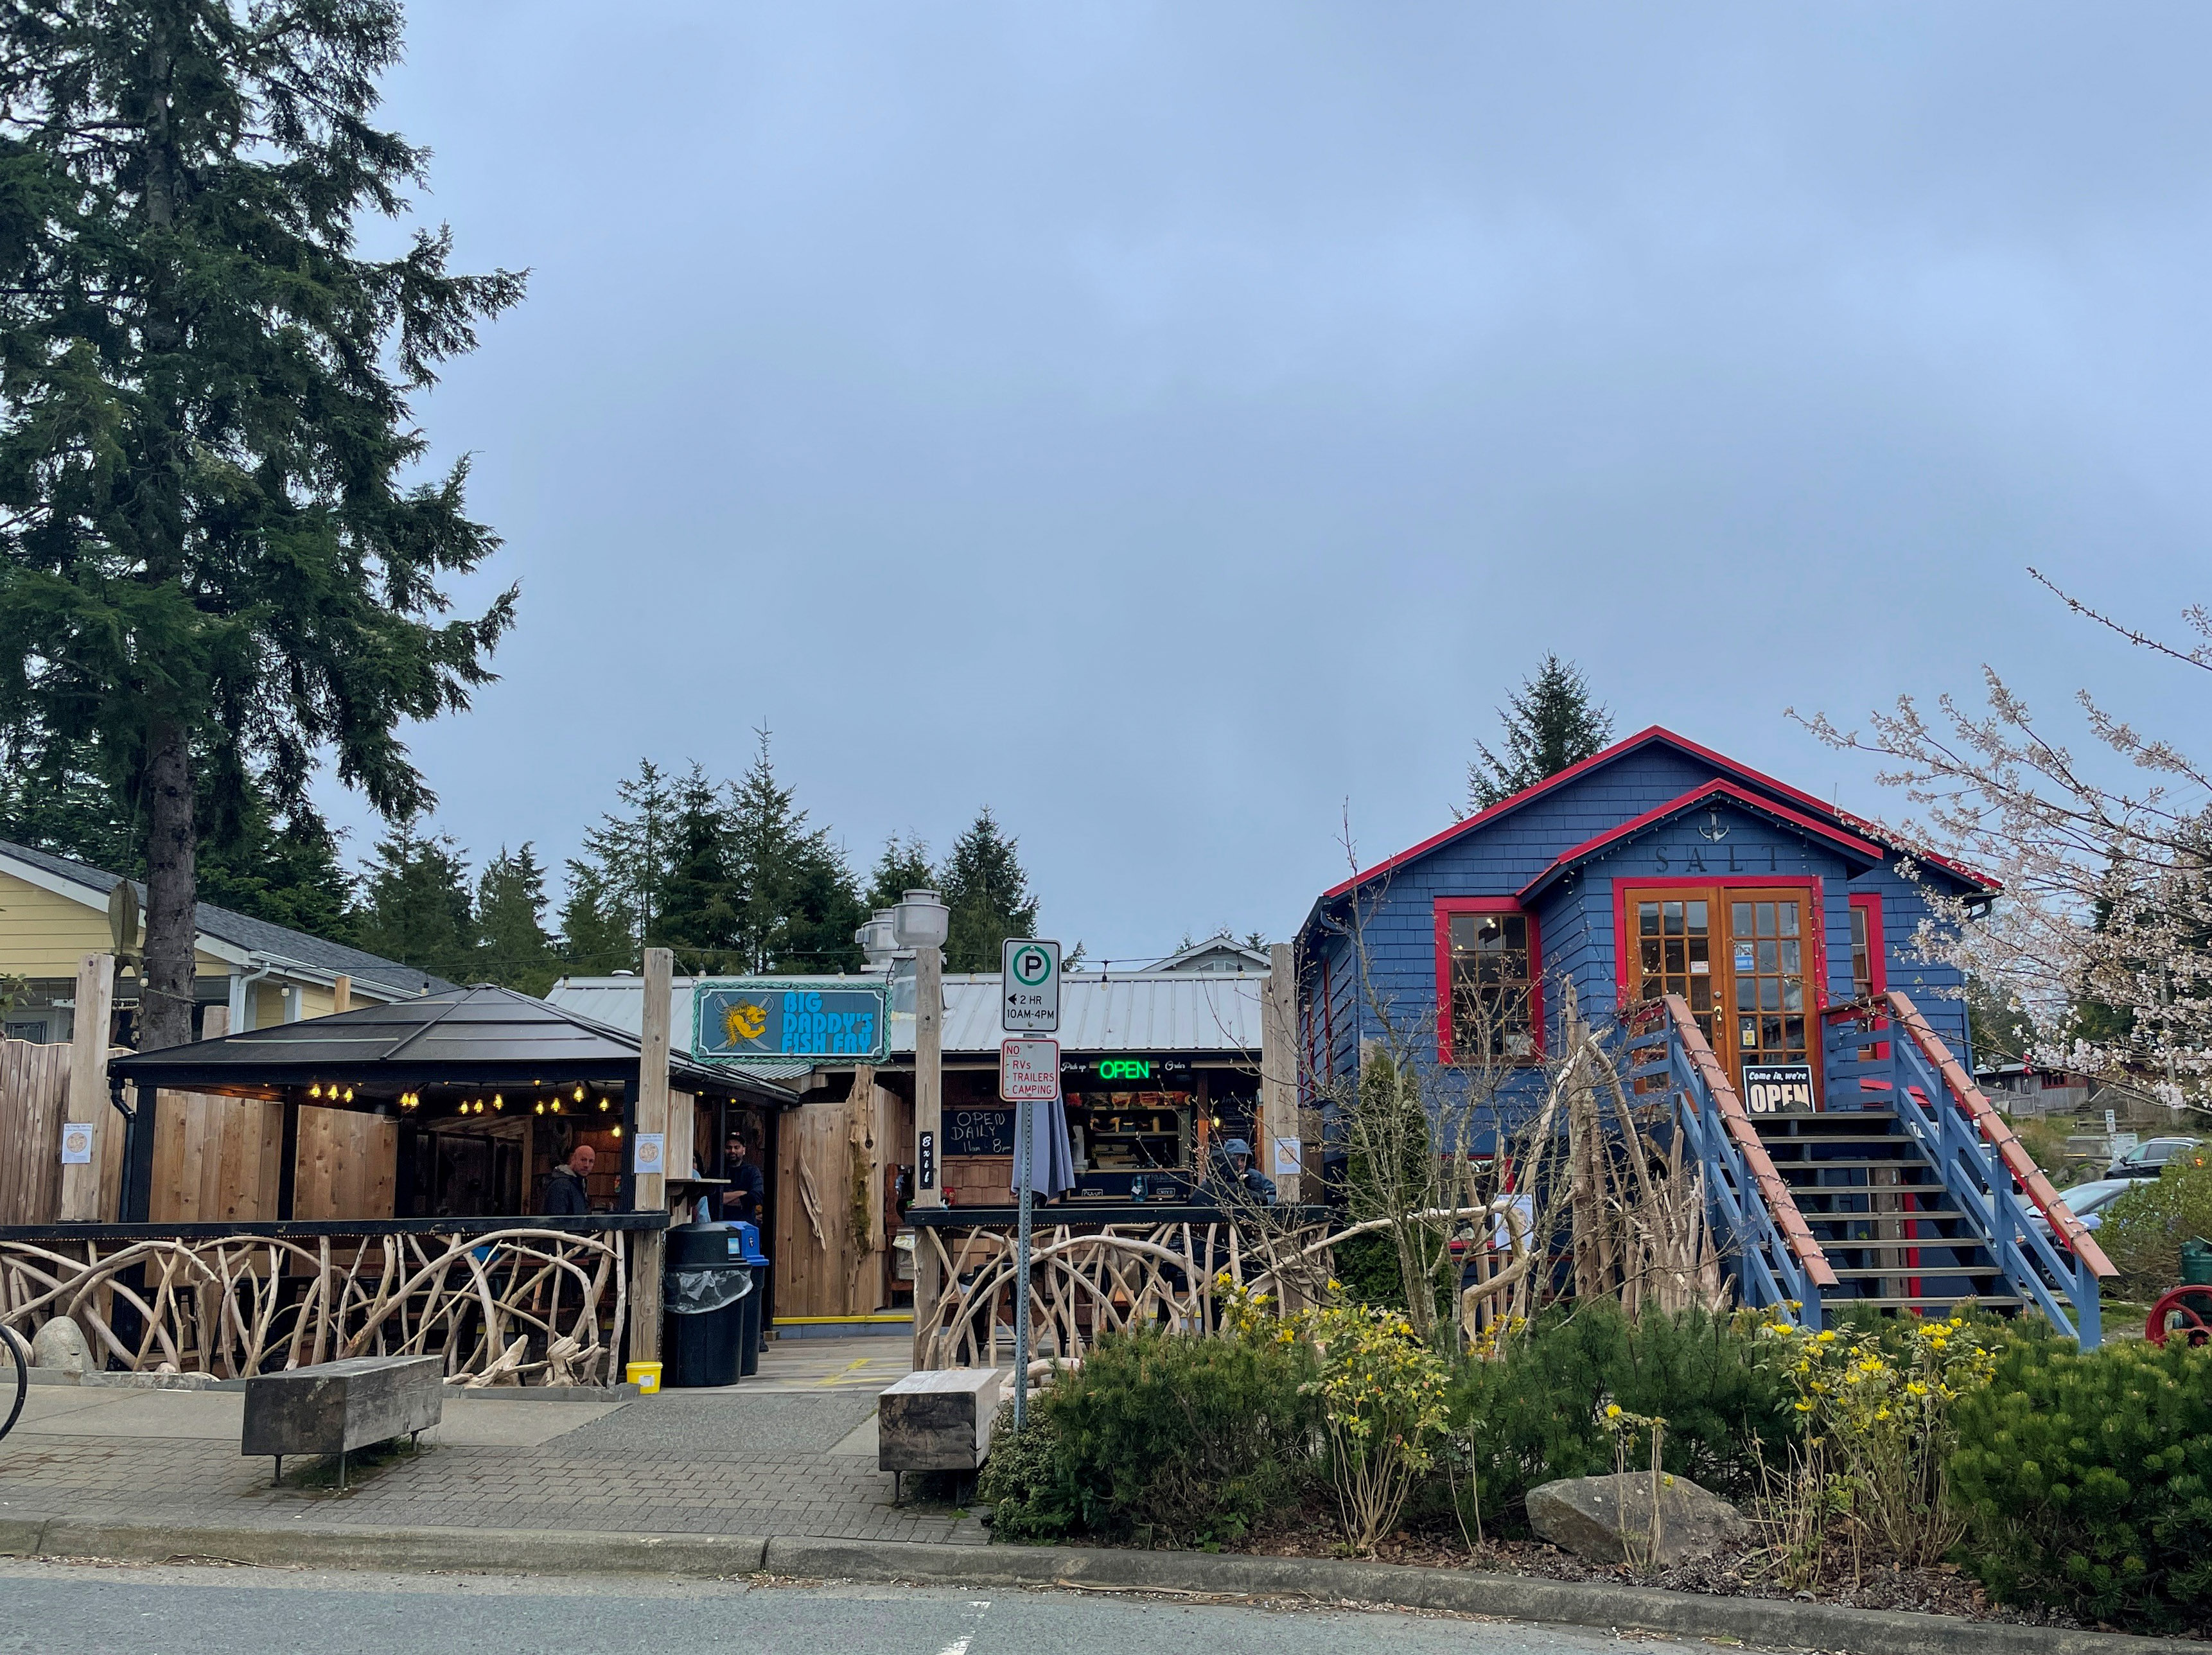 outside view of shops in the Tofino Townsite